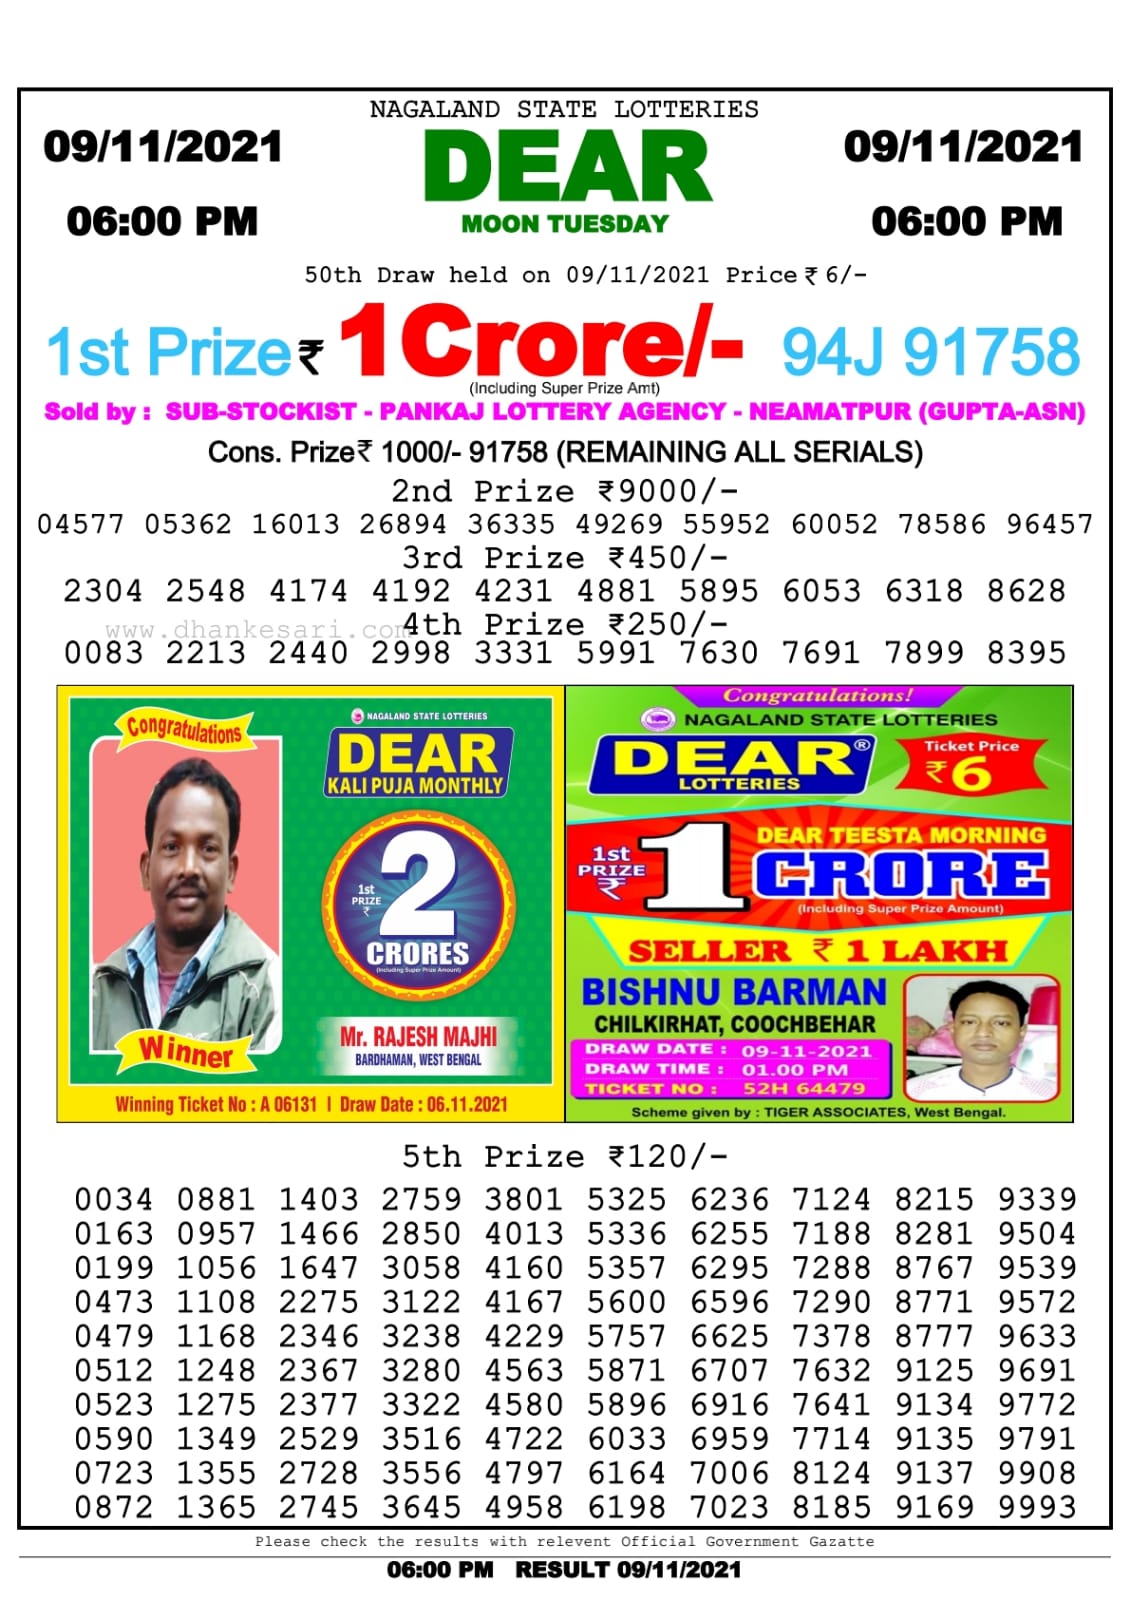 Dear Lottery Nagaland State Lottery Today 6:00 PM 09-11-2021